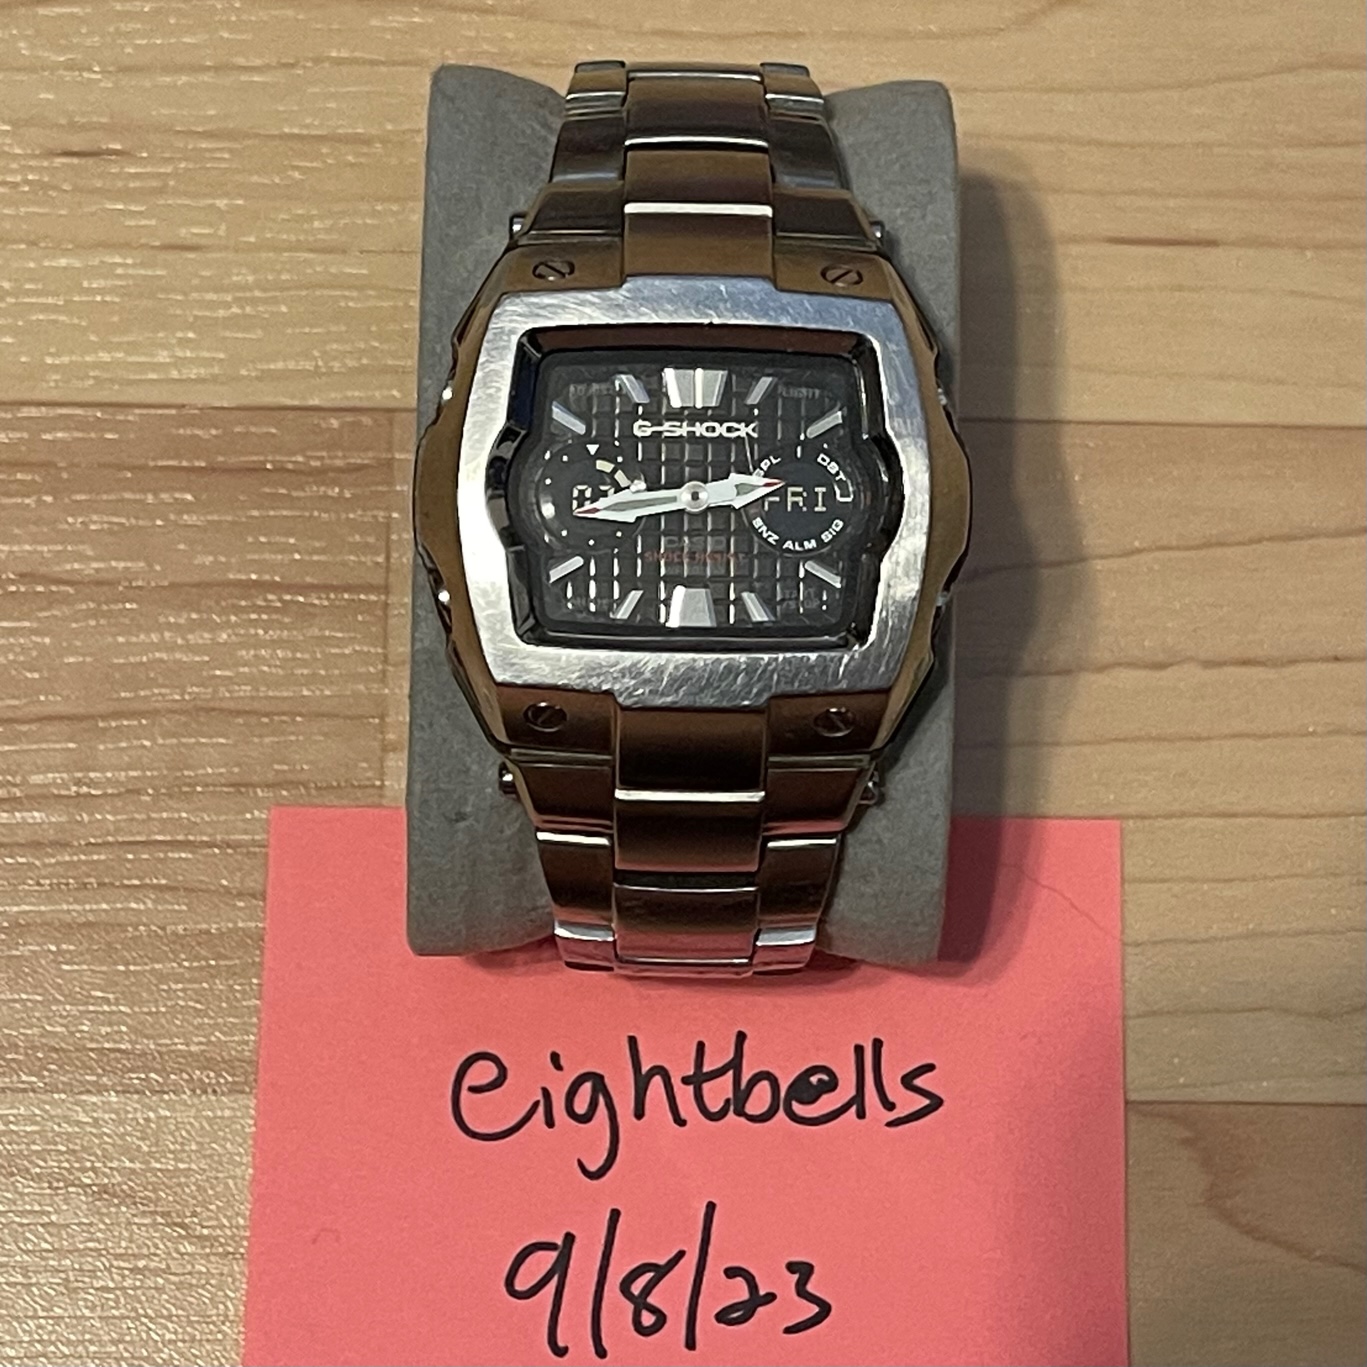 WTS] Casio G-Shock G-011D-1A “The Cube” Black Waffle Dial Steel